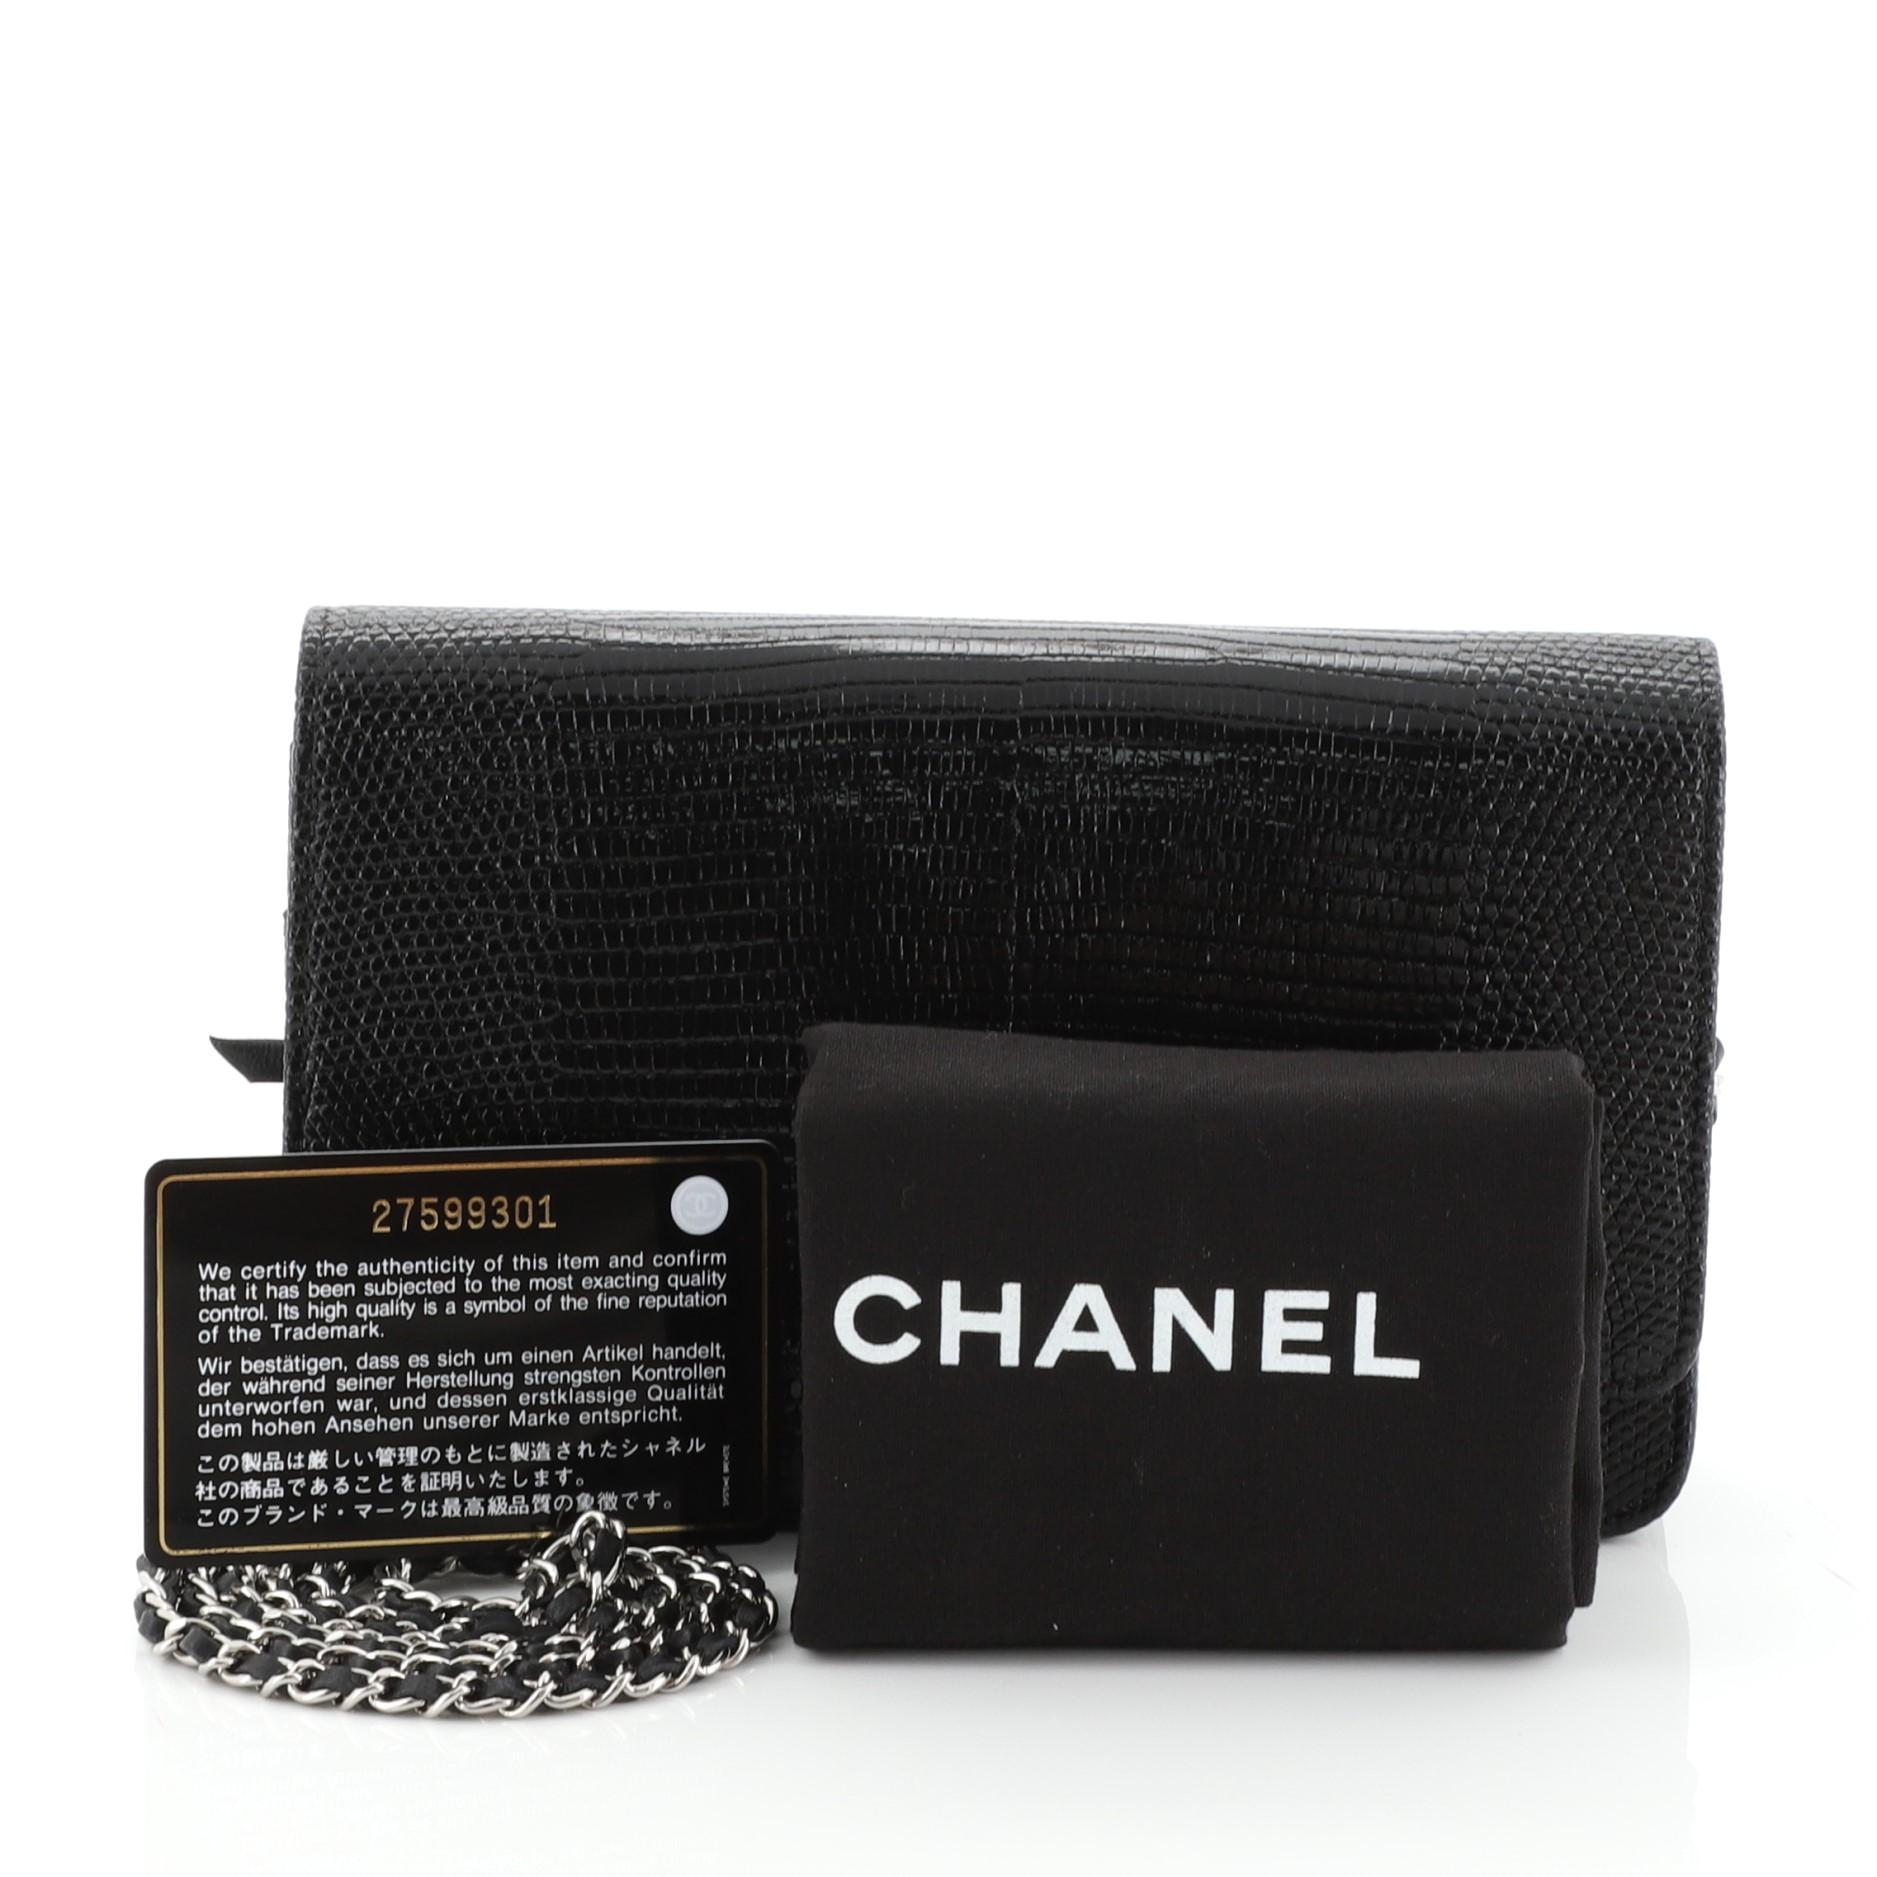 This Chanel Golden Class Wallet on Chain Lizard Embossed Leather, crafted from black lizard embossed leather, features woven-in leather chain straps and silver-tone hardware. Its CC flip clasp closure opens to a black fabric and leather interior